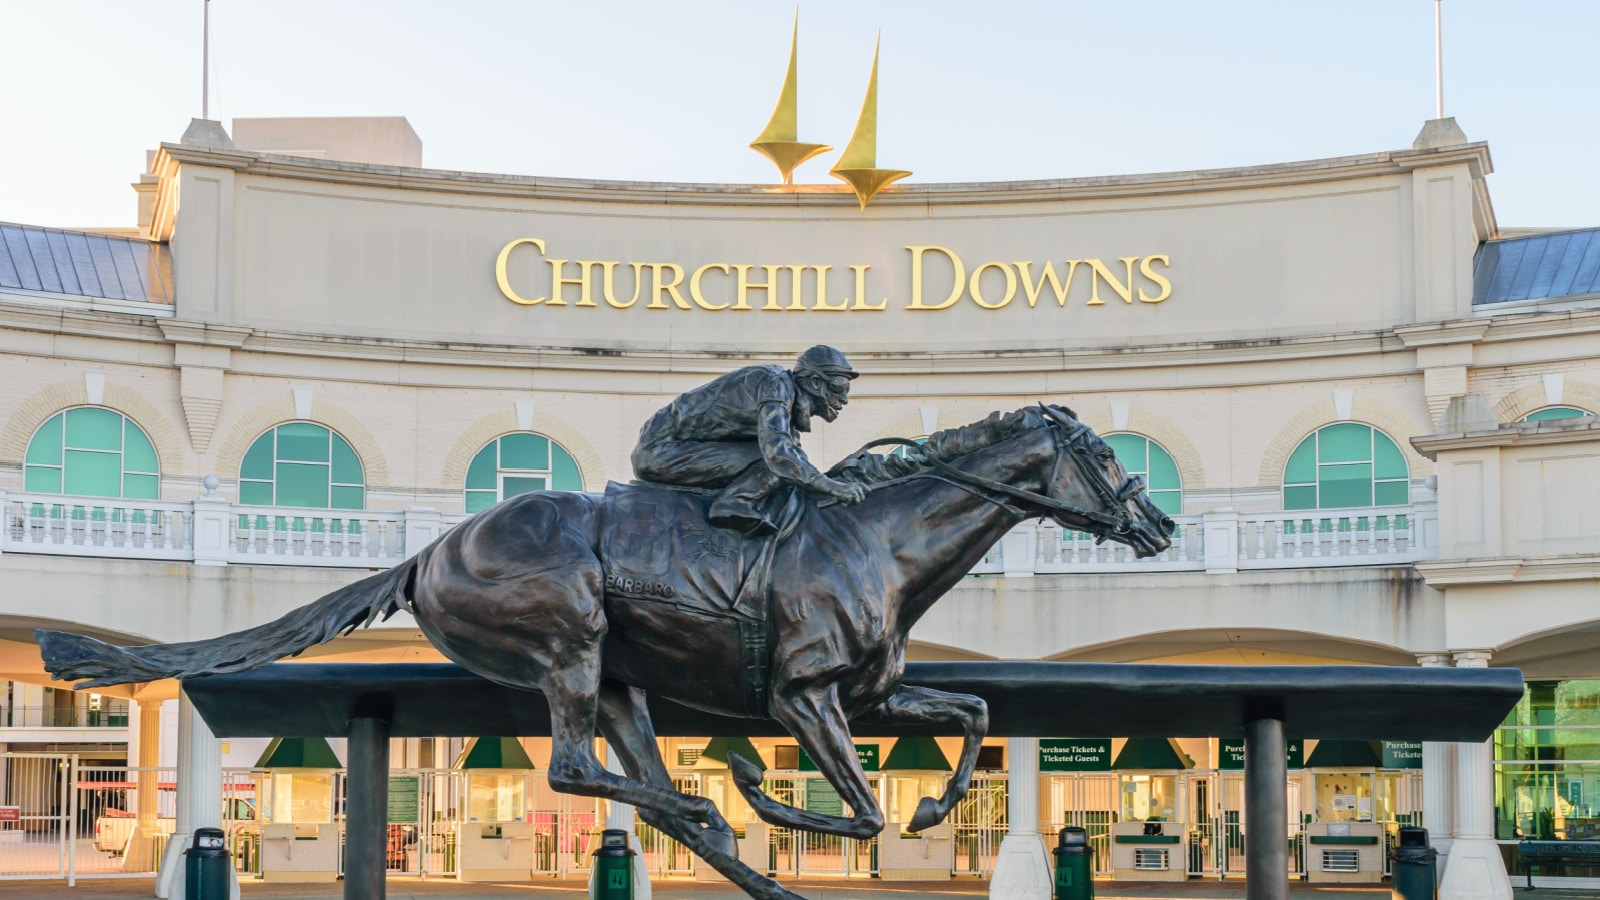 <p>In Louisville, Churchill Downs is a must-visit, especially during the Kentucky Derby. It offers a glimpse into the world of horse racing and a historic racetrack.</p>